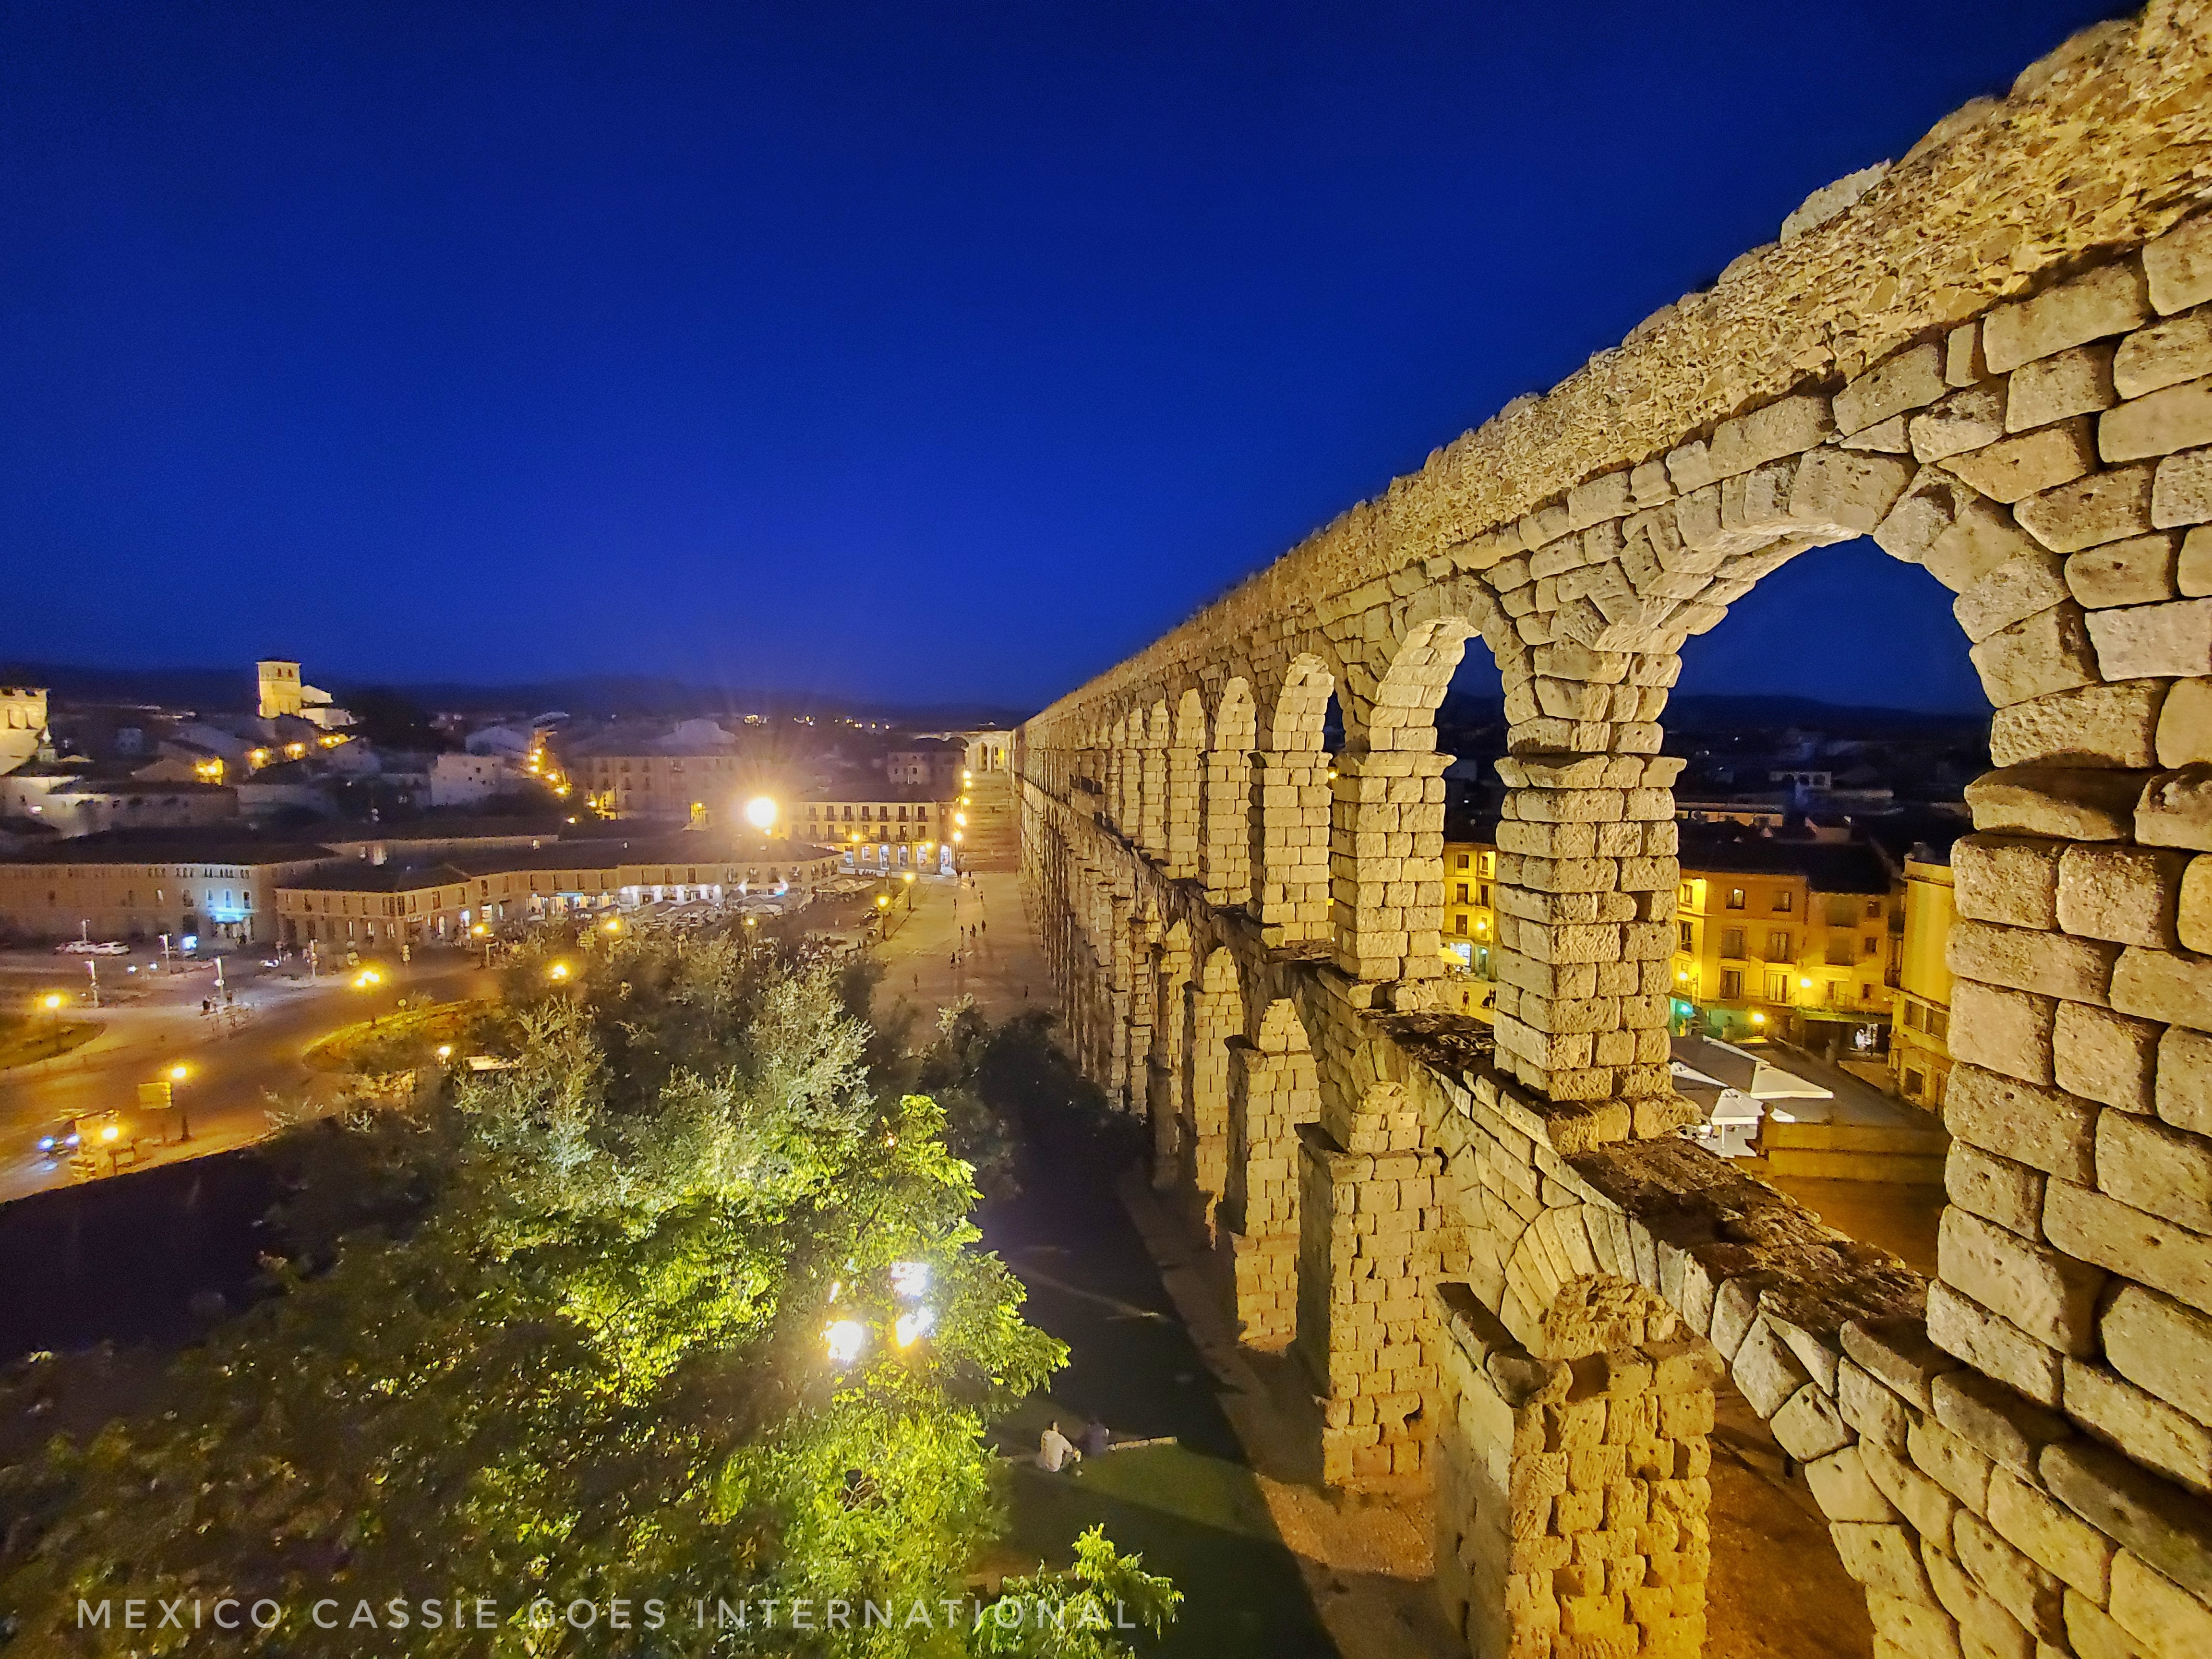 2 storey aqueduct at night. arches are lit yellow and are on right of photo heading into distance